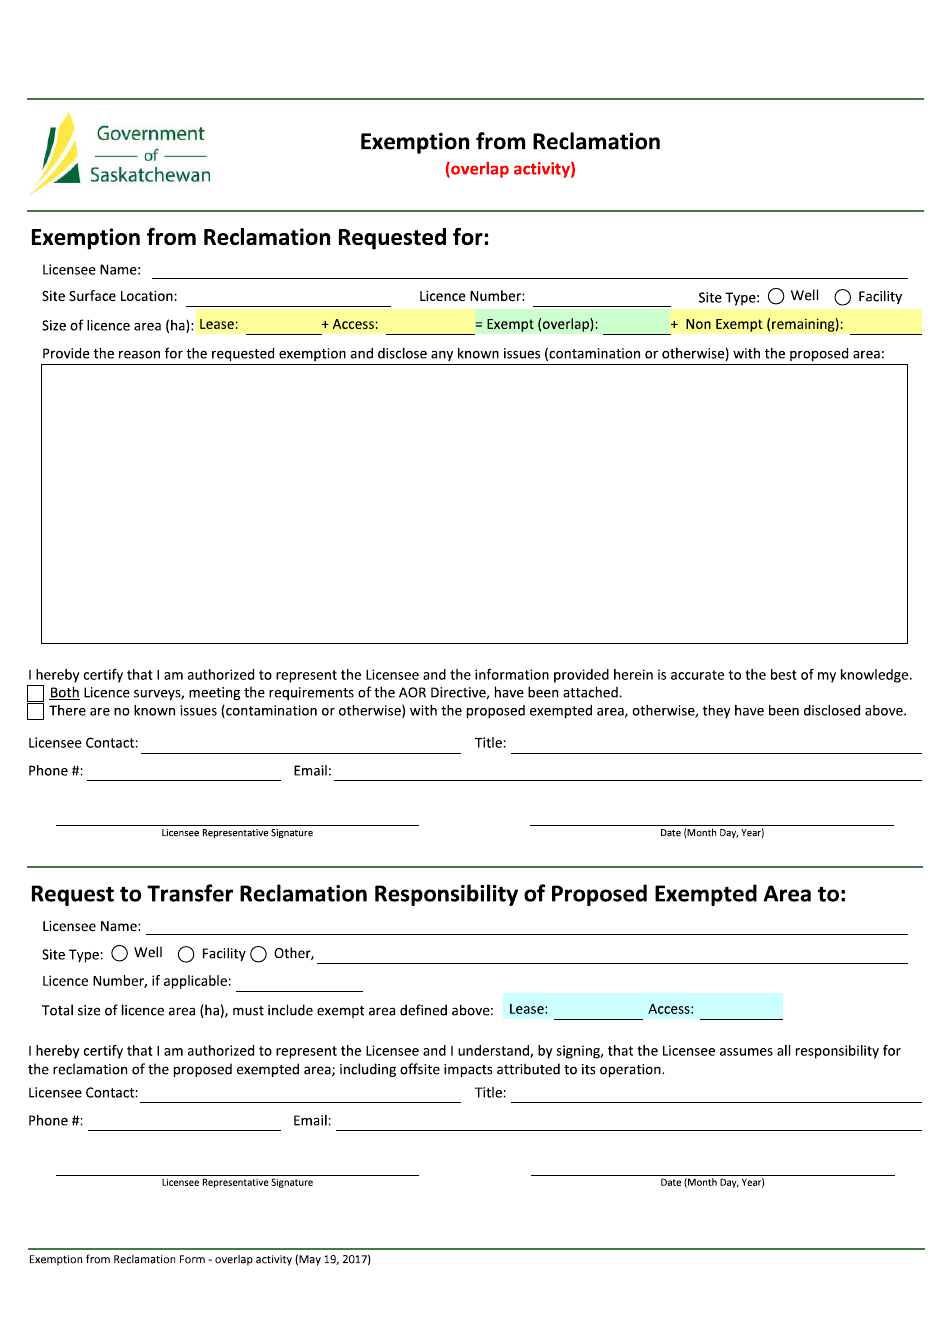 Exemption From Reclamation (Overlap Activity) Form - Saskatchewan, Canada, Page 1